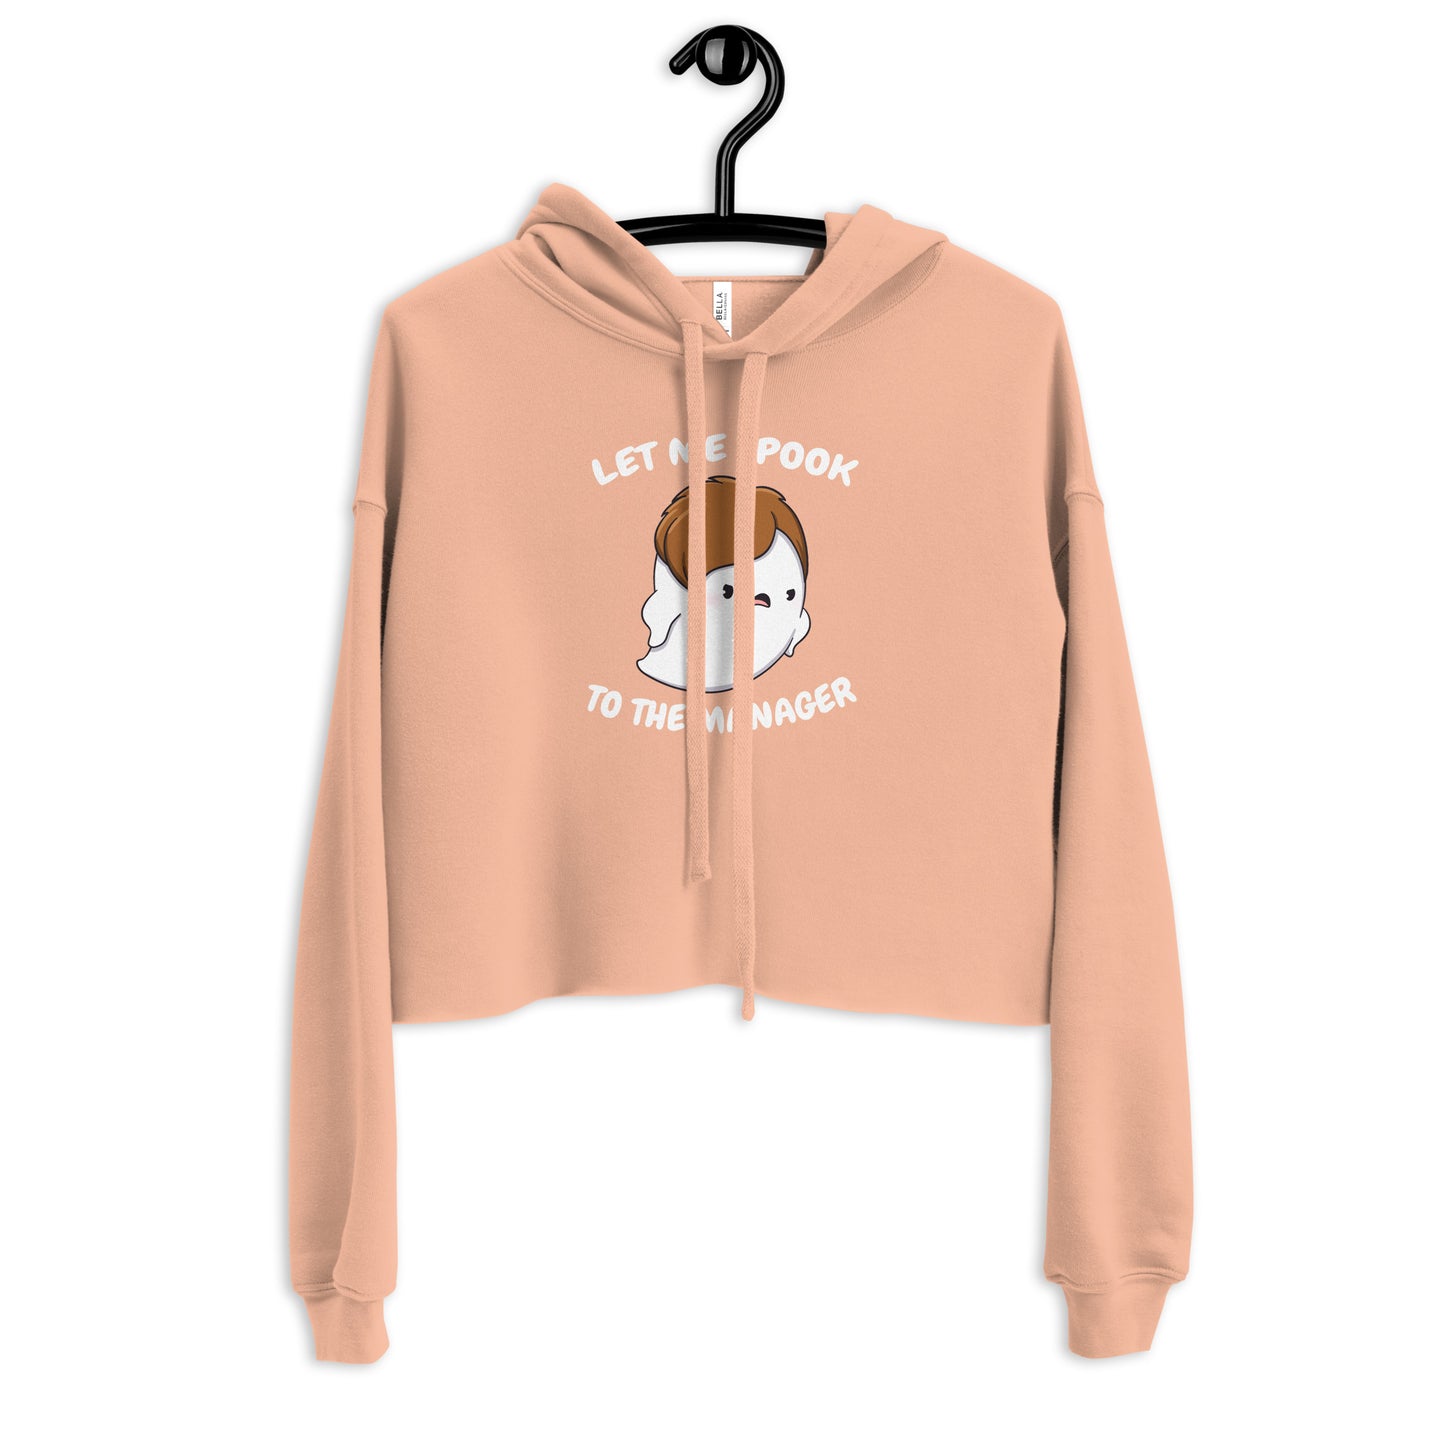 Let me spook to the manager - Cropped Hoodie